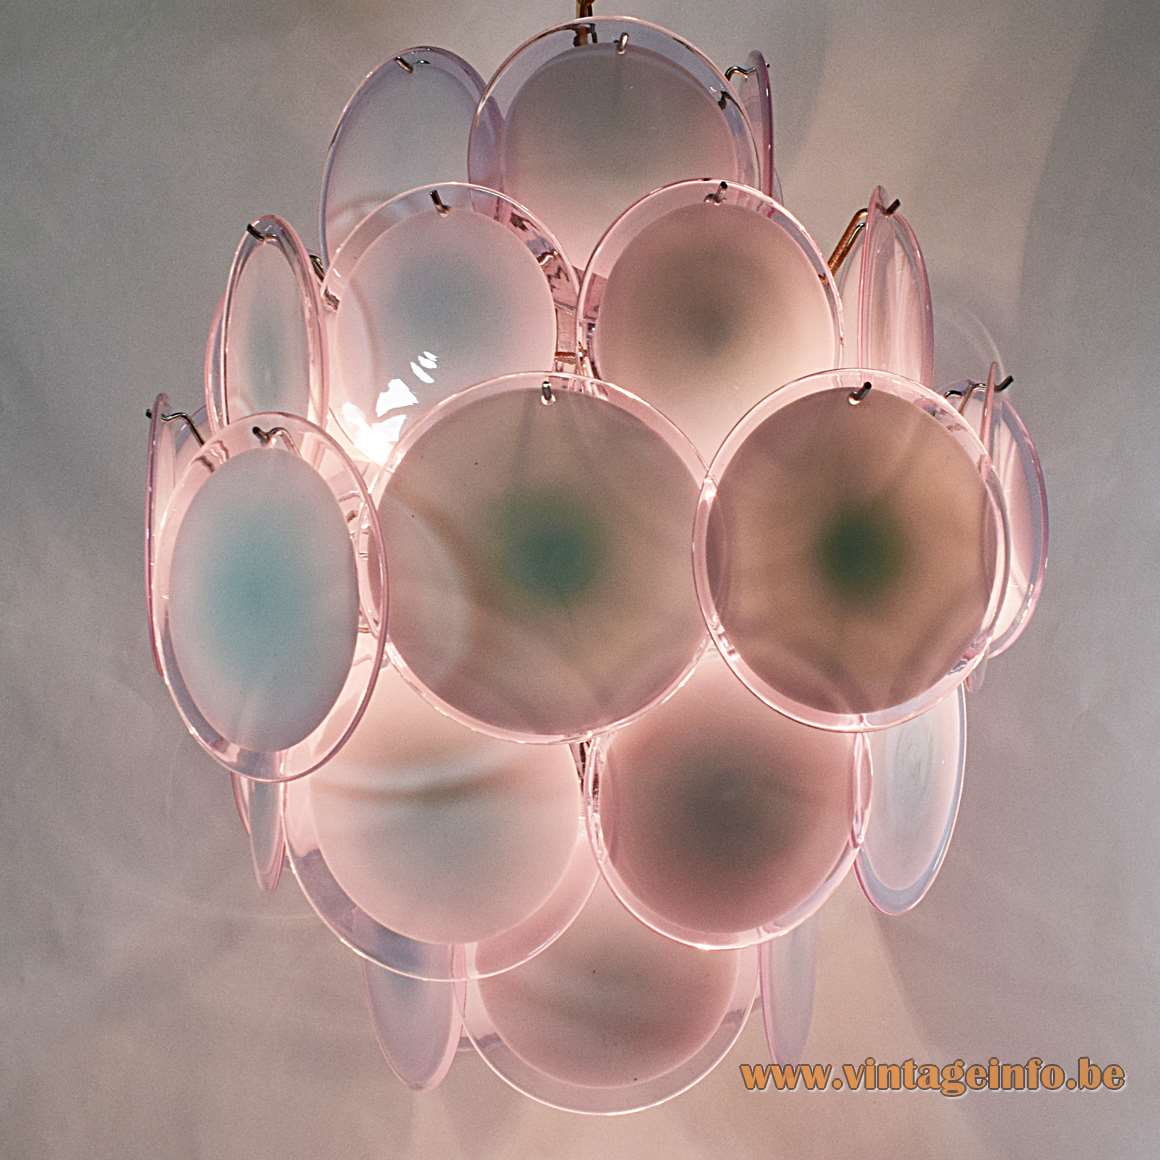 Gino Vistosi Multicoloured Discs Chandelier - Version with blue turning into pink discs